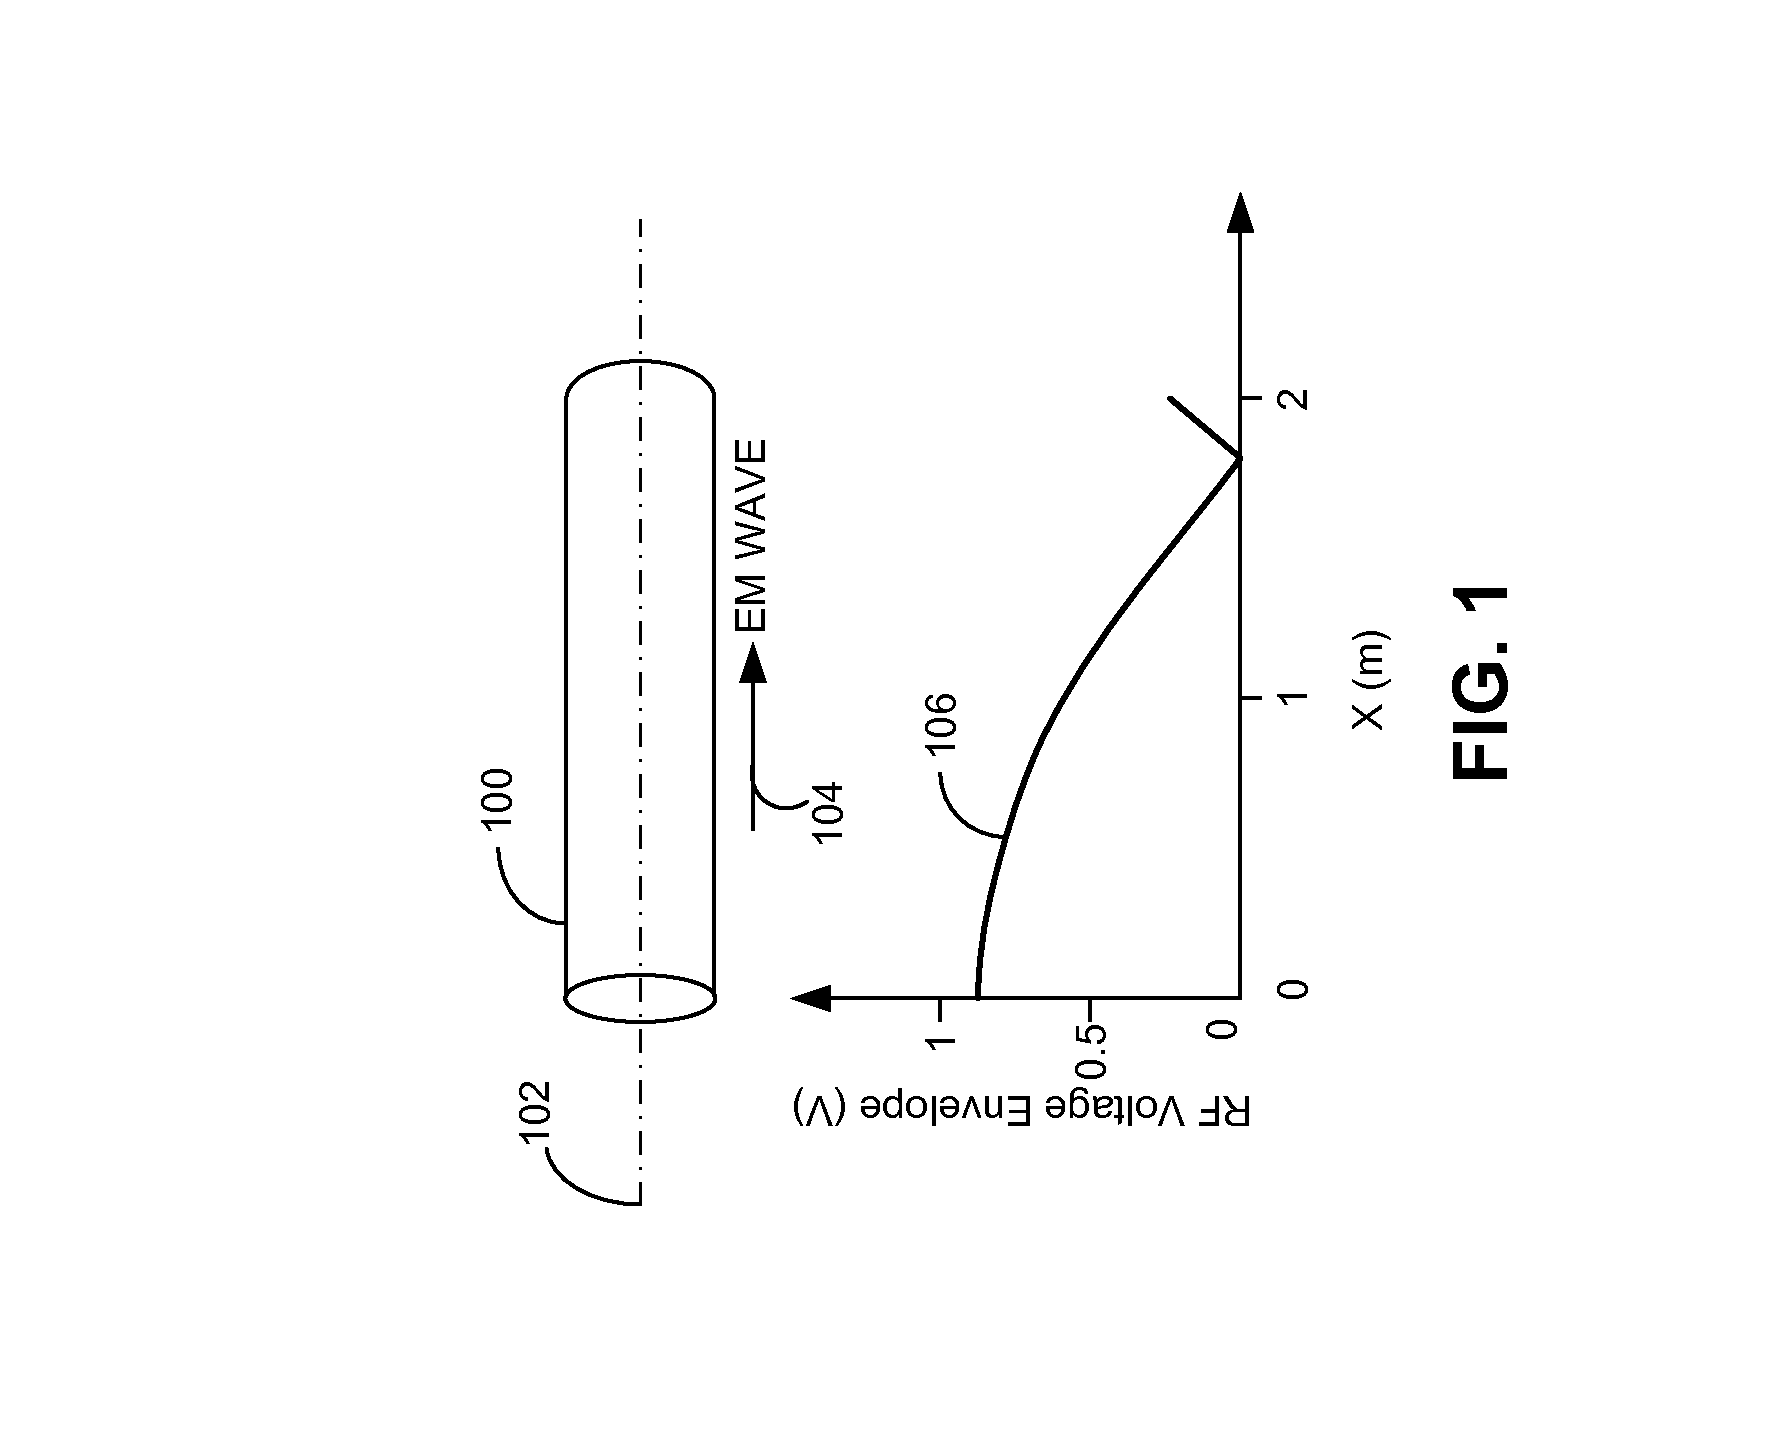 Radio-frequency sputtering system with rotary target for fabricating solar cells